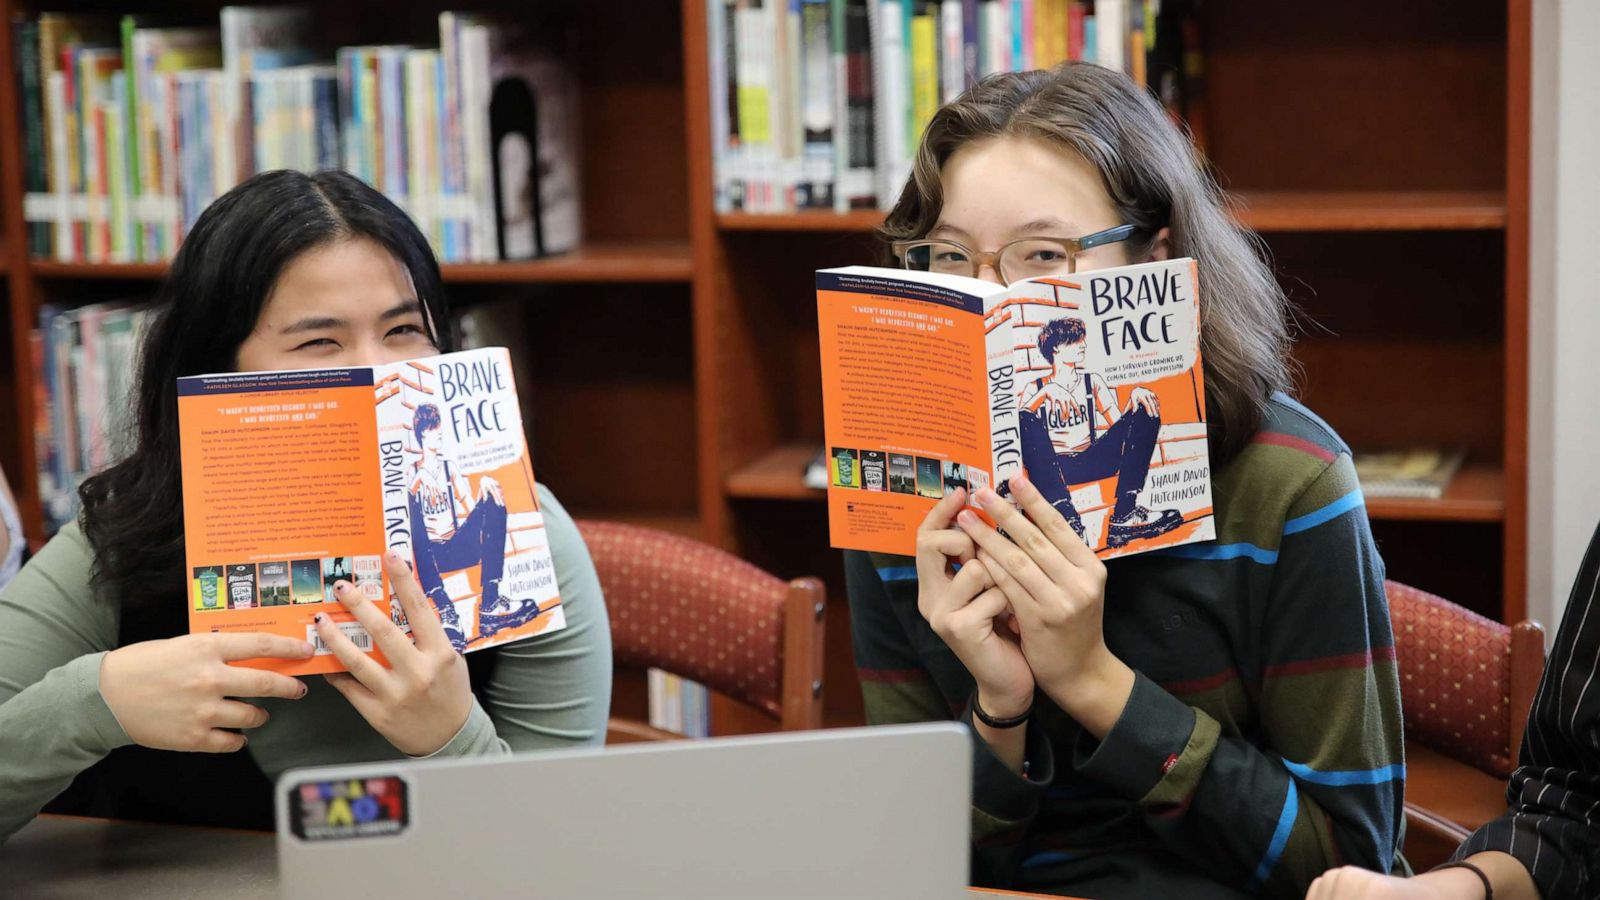 This school board made news for banning books. Voters flipped it